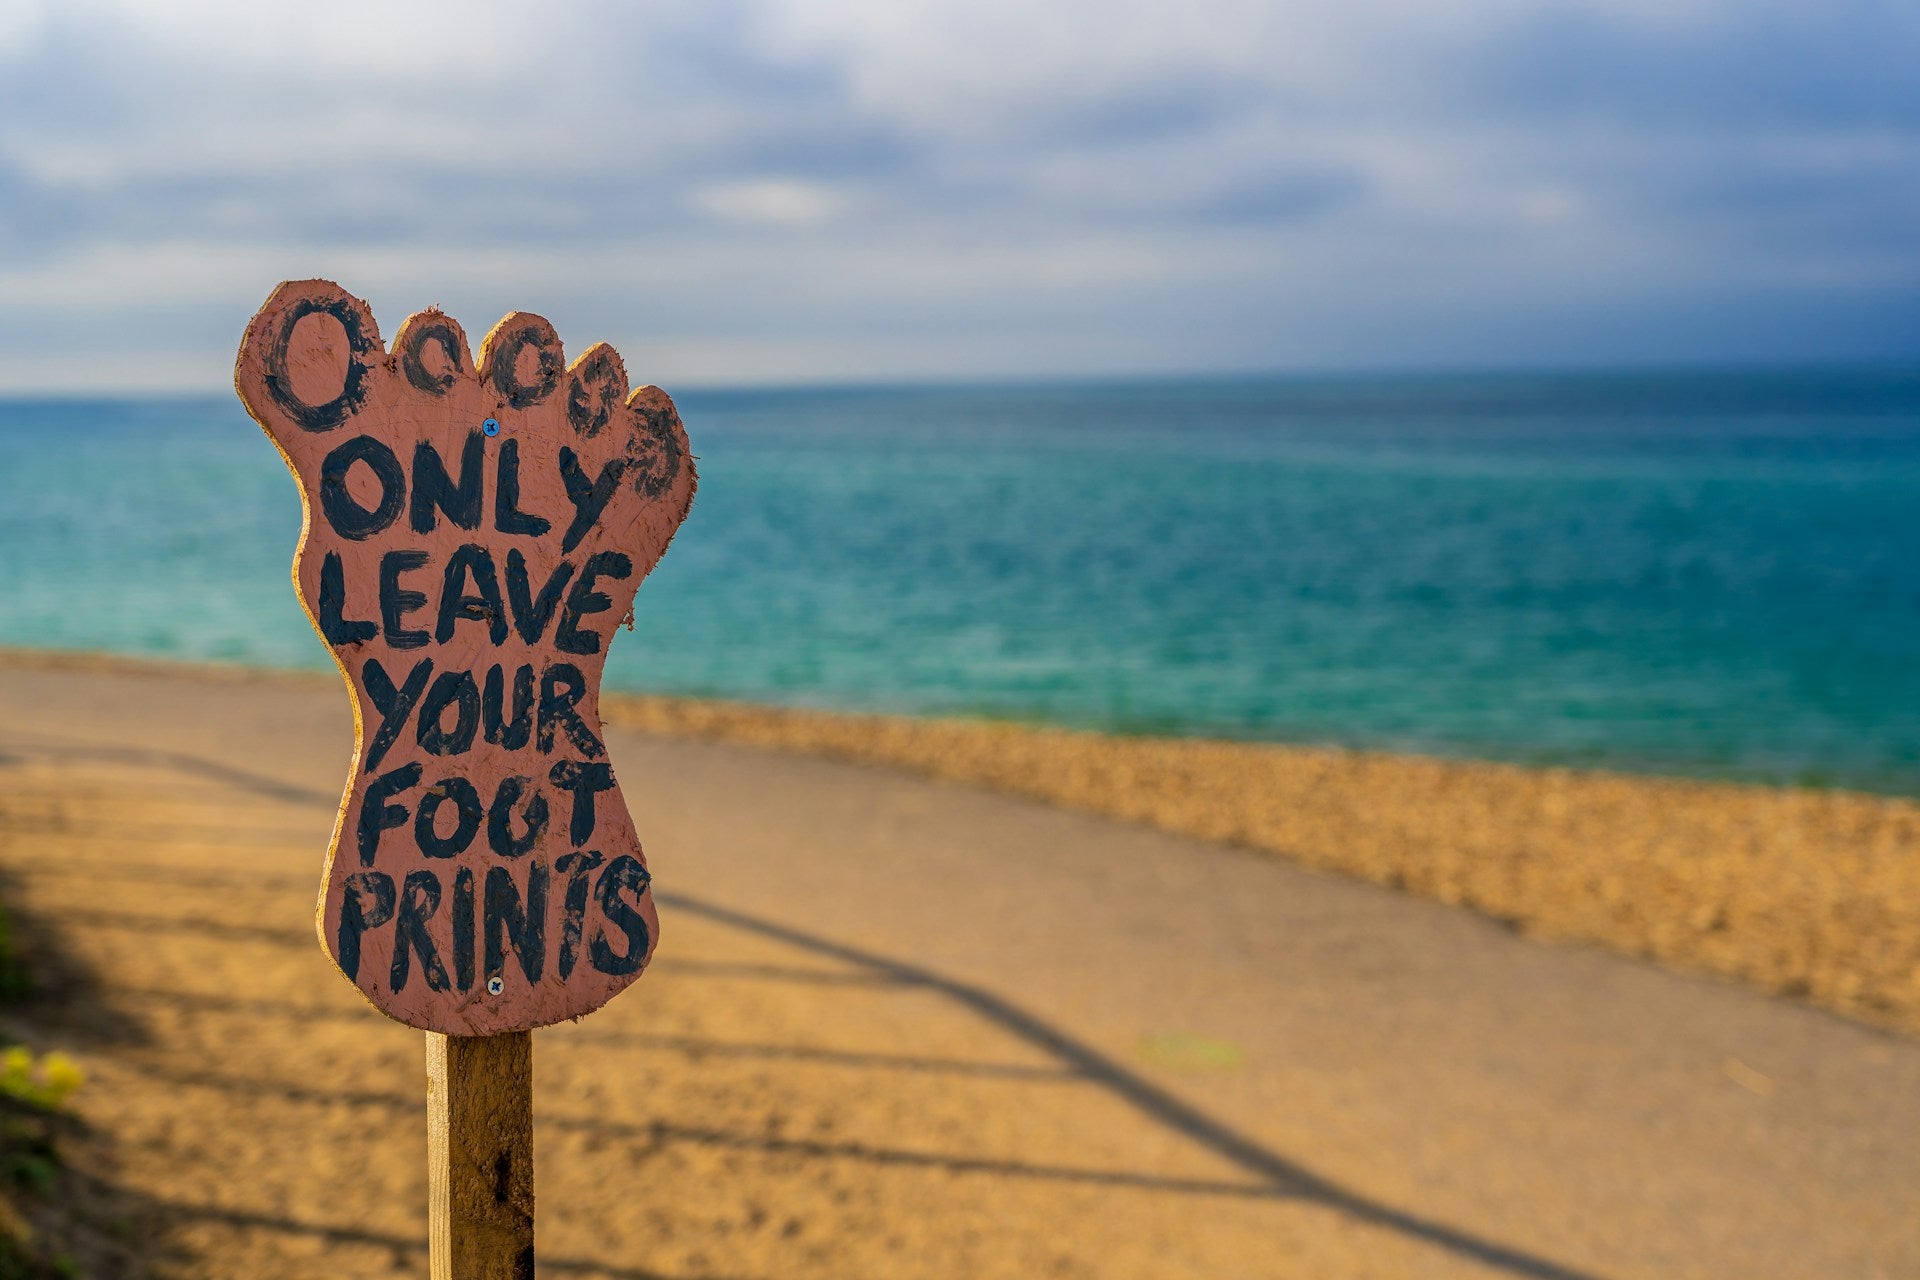 A picture of a path on a beach. A footprint-shaped sign reads "ONly leave your footprints."